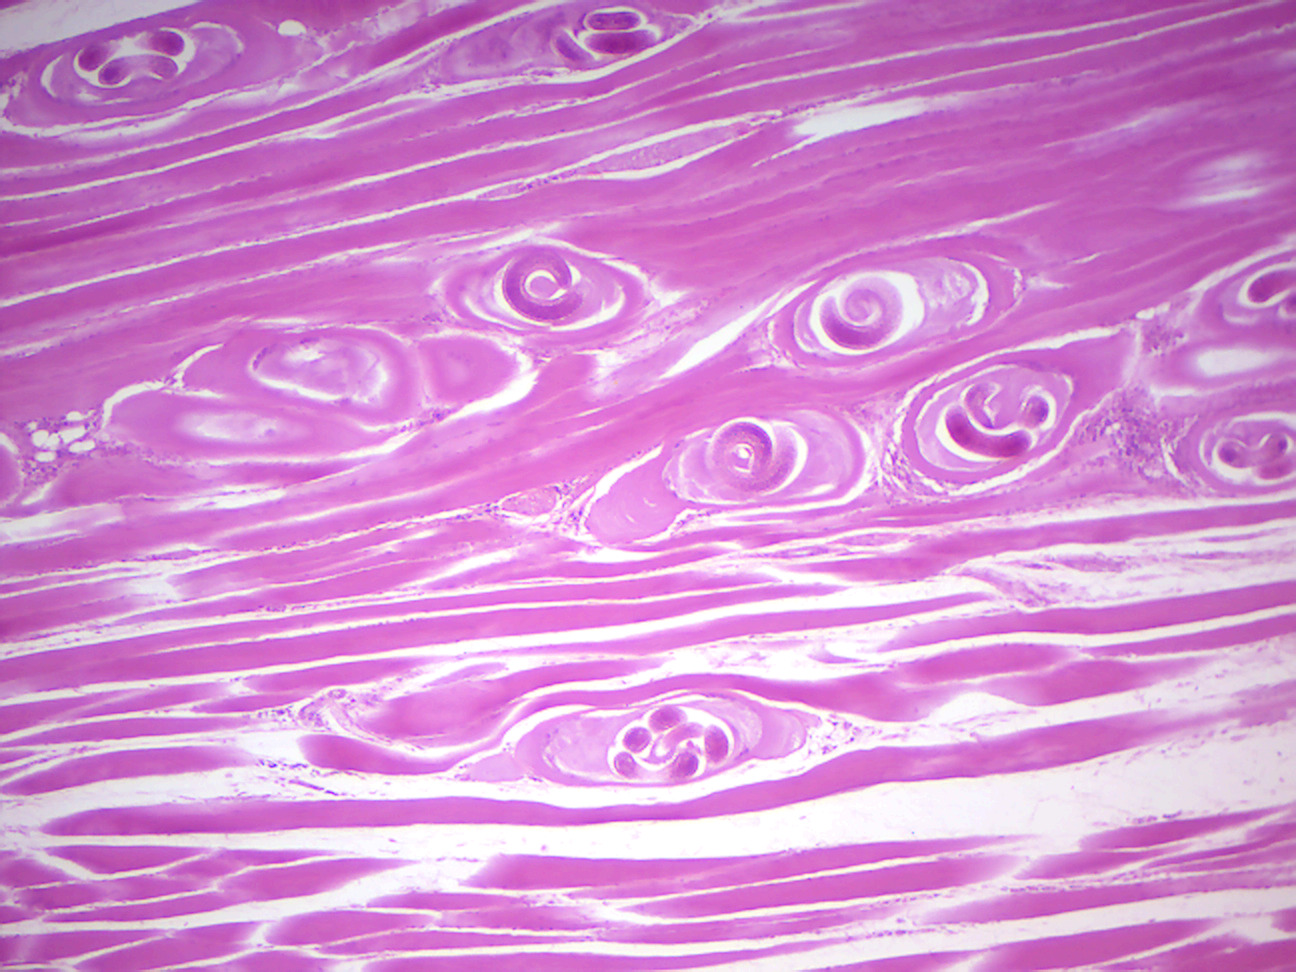 Trichinella encysted in muscle.